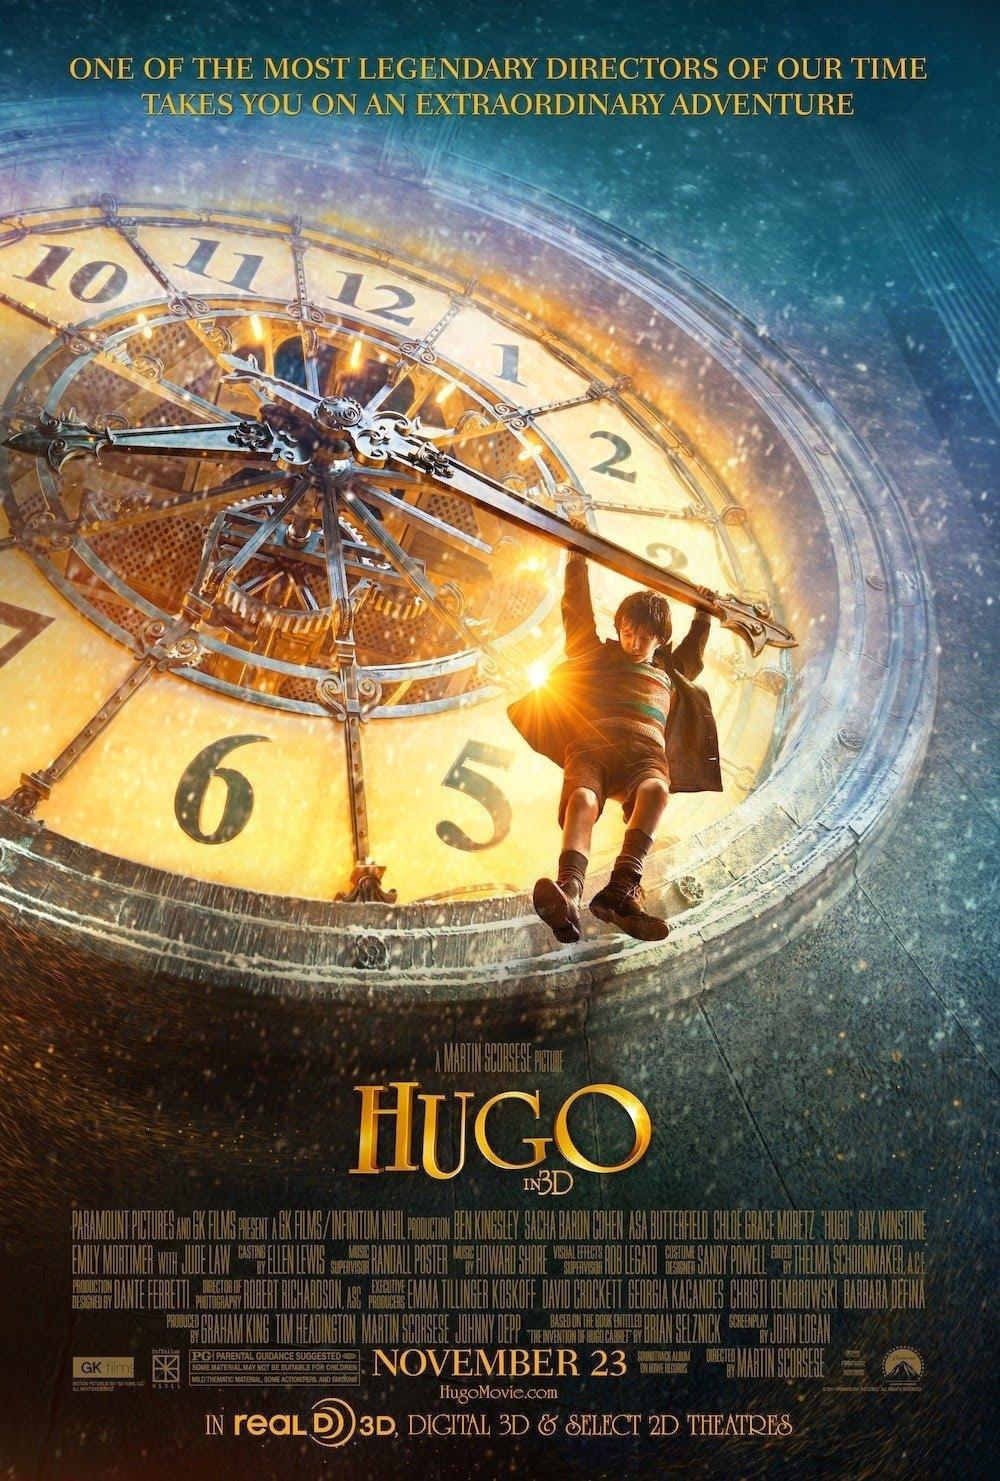 3. HUgO Directed by Martin Scorsese, based on the novel by Brian Selznick. Score by Howard Shore. Howard Shore is a Canadian composer, he has won 3 oscars, 2 Golden Globes and 4 Grammys.